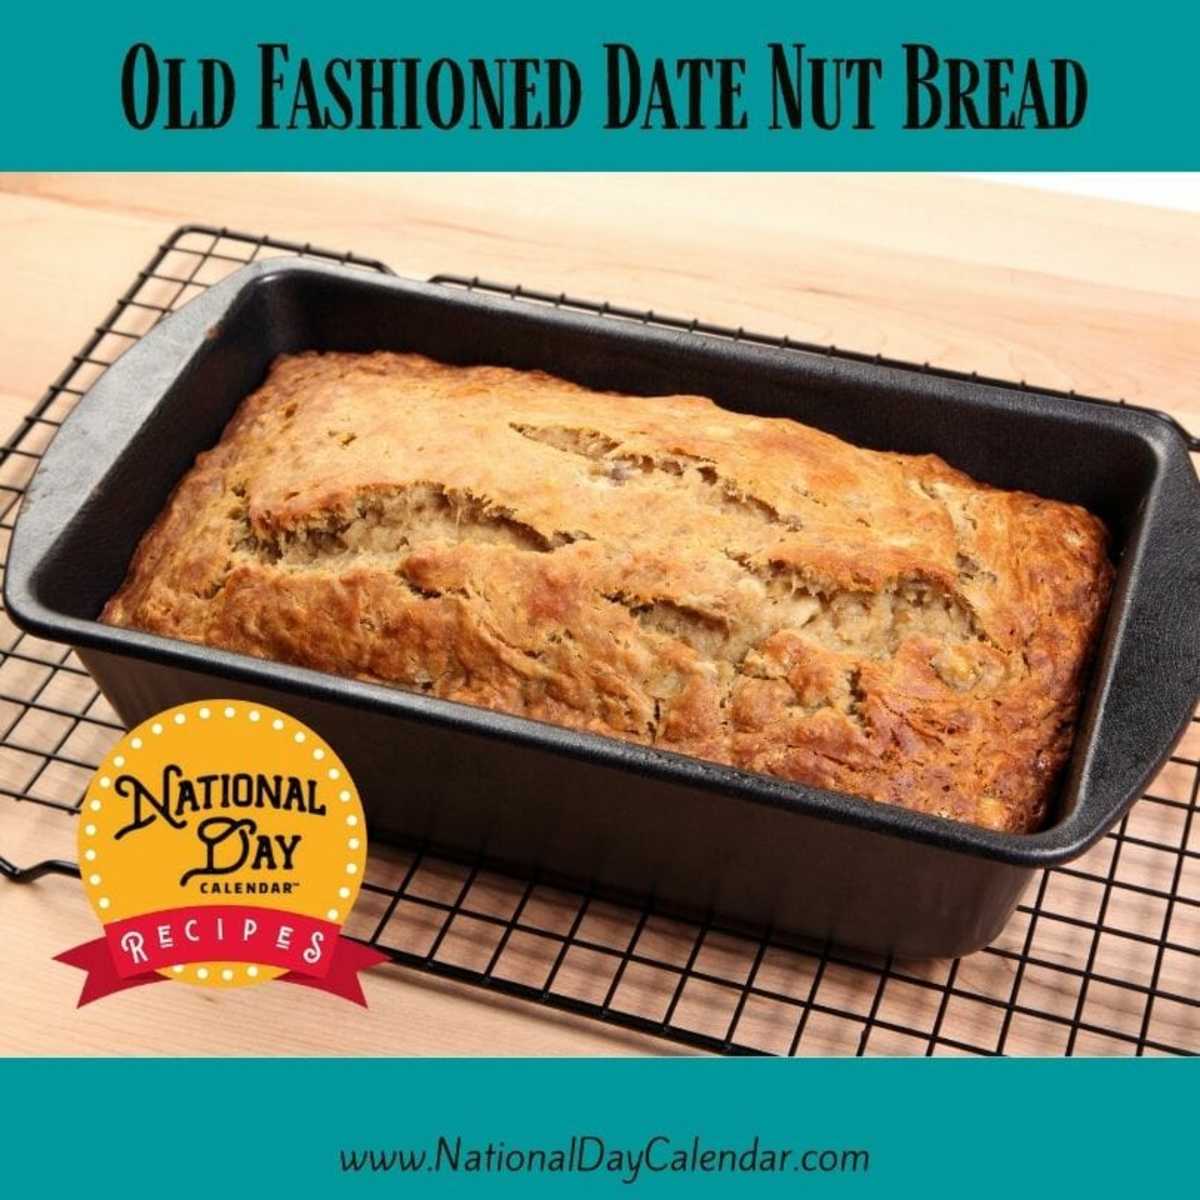 Old Fashioned Date Nut Bread